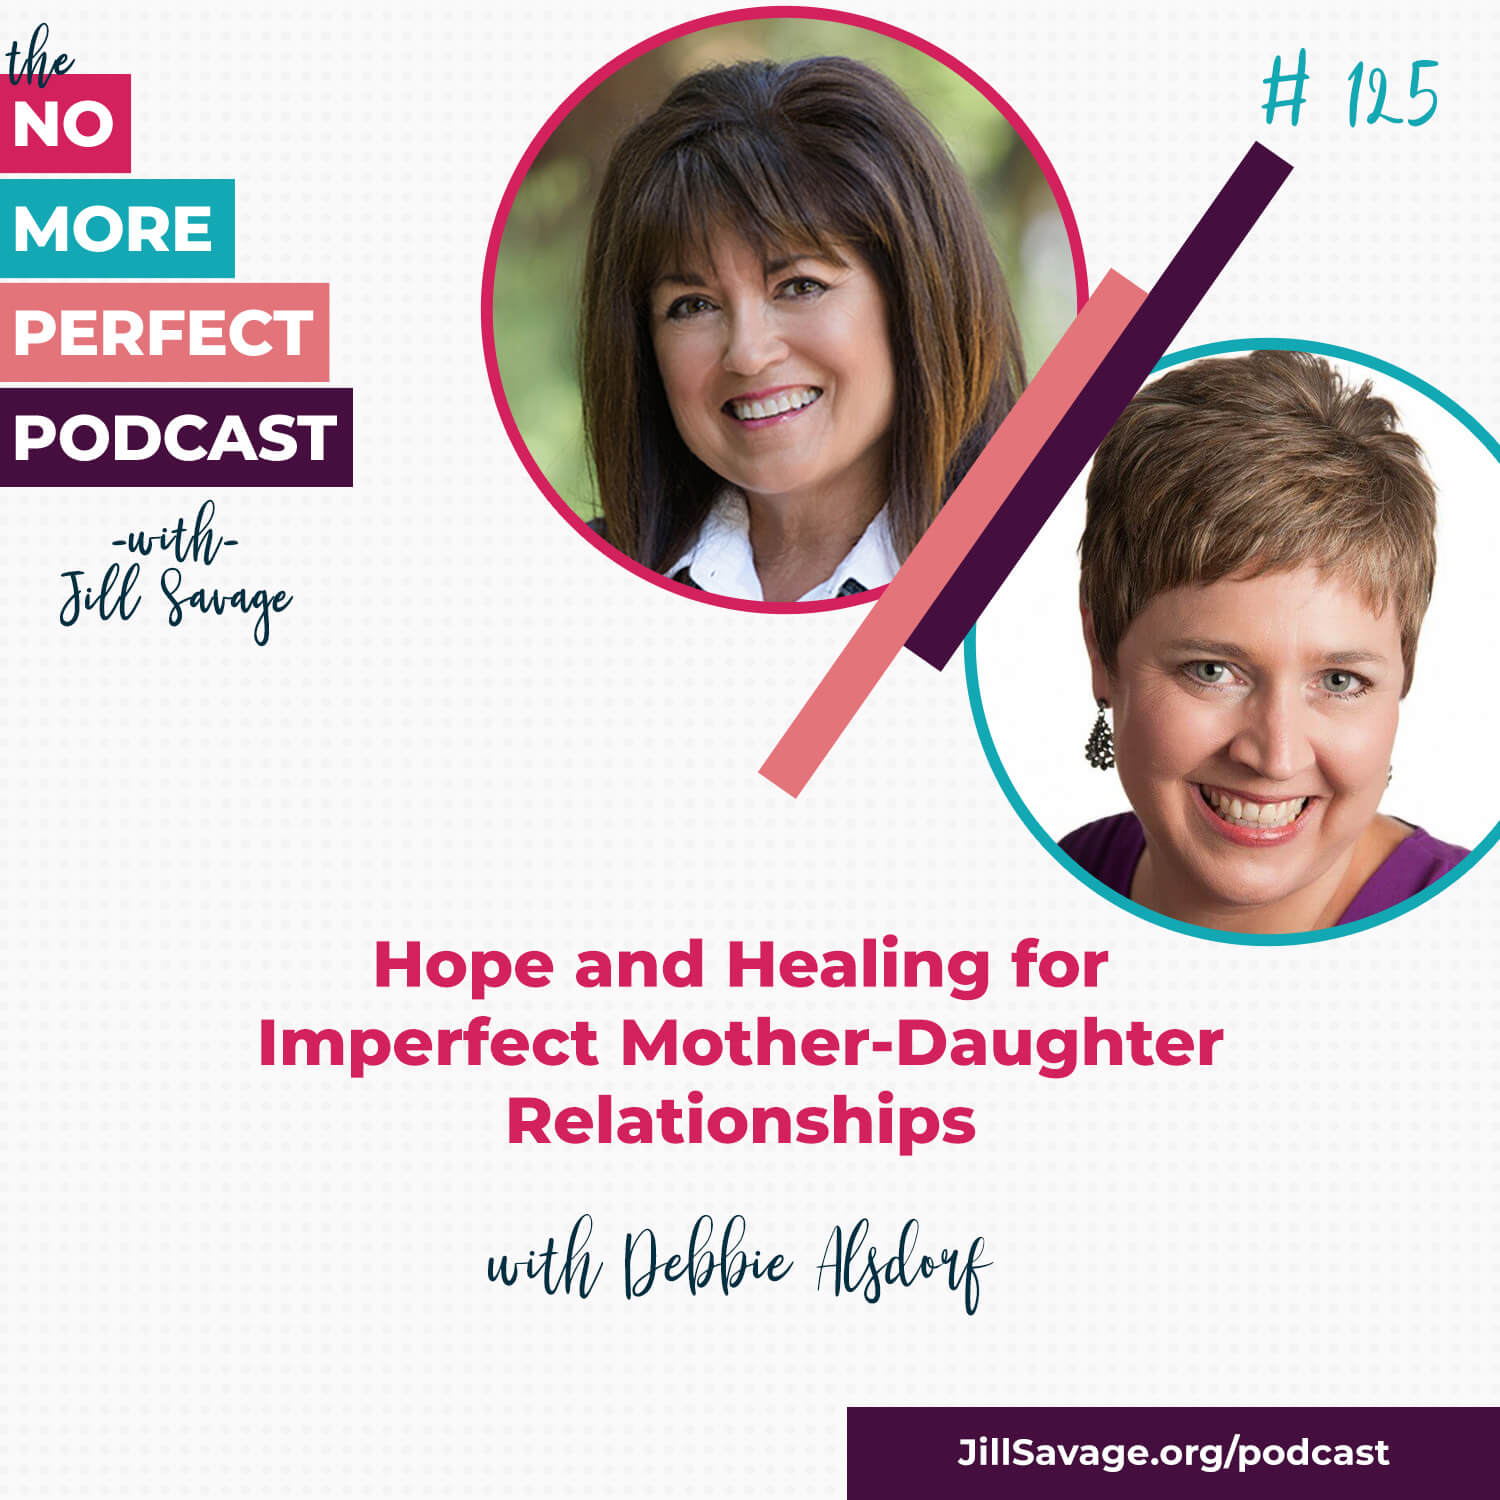 Hope and Healing for Imperfect Mother-Daughter Relationships with Debbie Alsdorf  | Episode 125